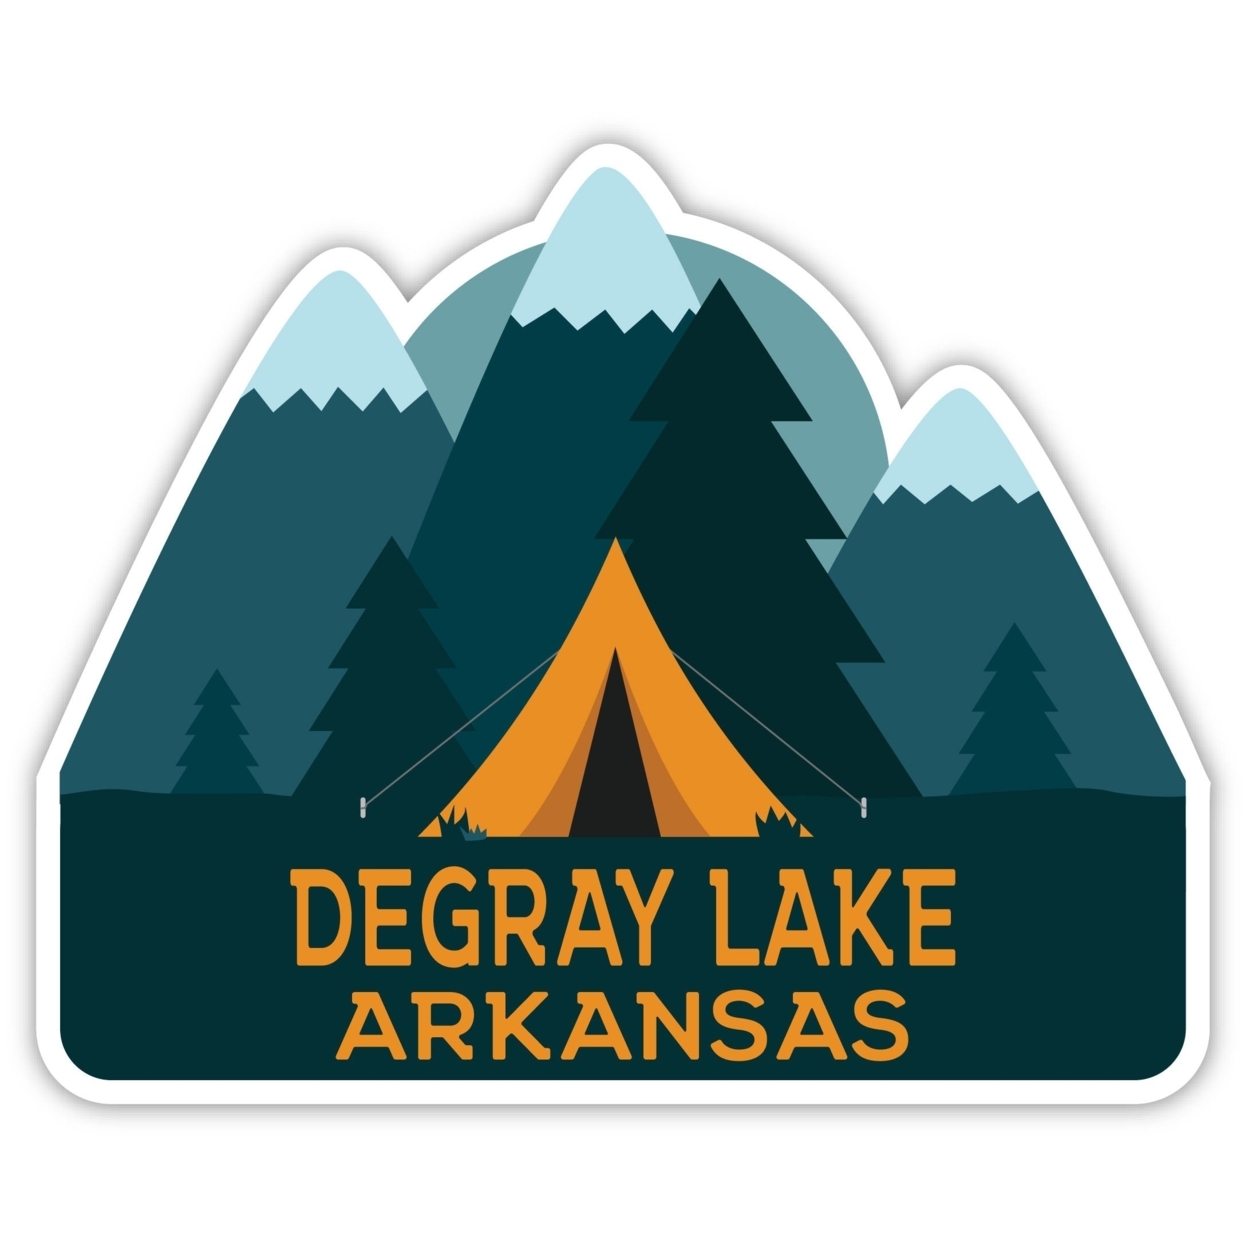 DeGray Lake Arkansas Souvenir Decorative Stickers (Choose Theme And Size) - 4-Pack, 12-Inch, Tent